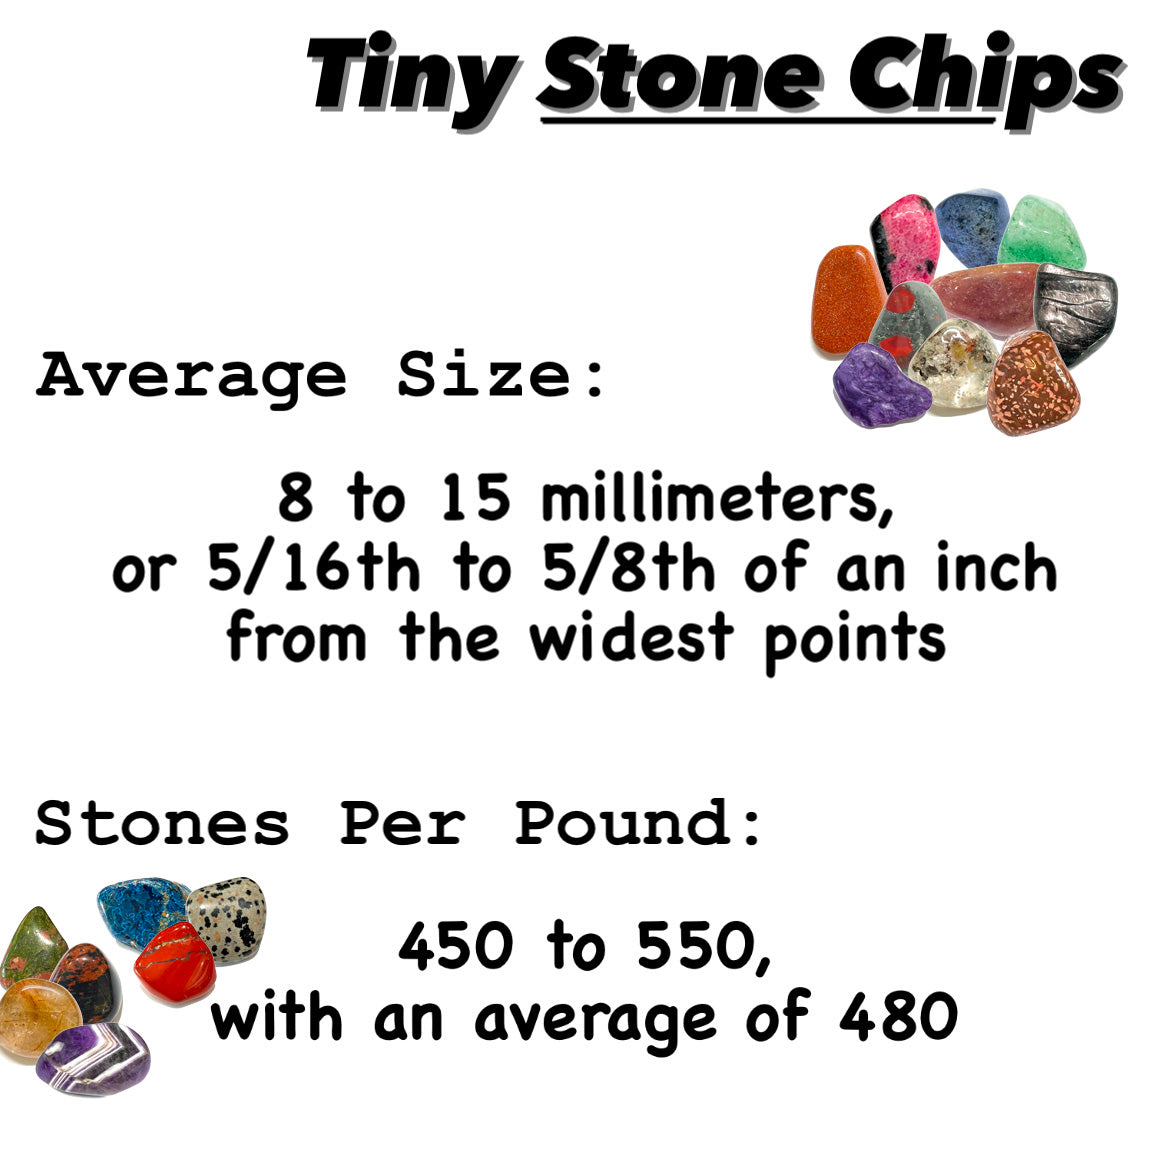 A sign that reads "Tiny Stone Chips.  Average Size: 8 to 15 millimeters, or 5/16th to 5/8th of an inch from the widest points.  Stones per pound: 450 to 550, with an average of 480."